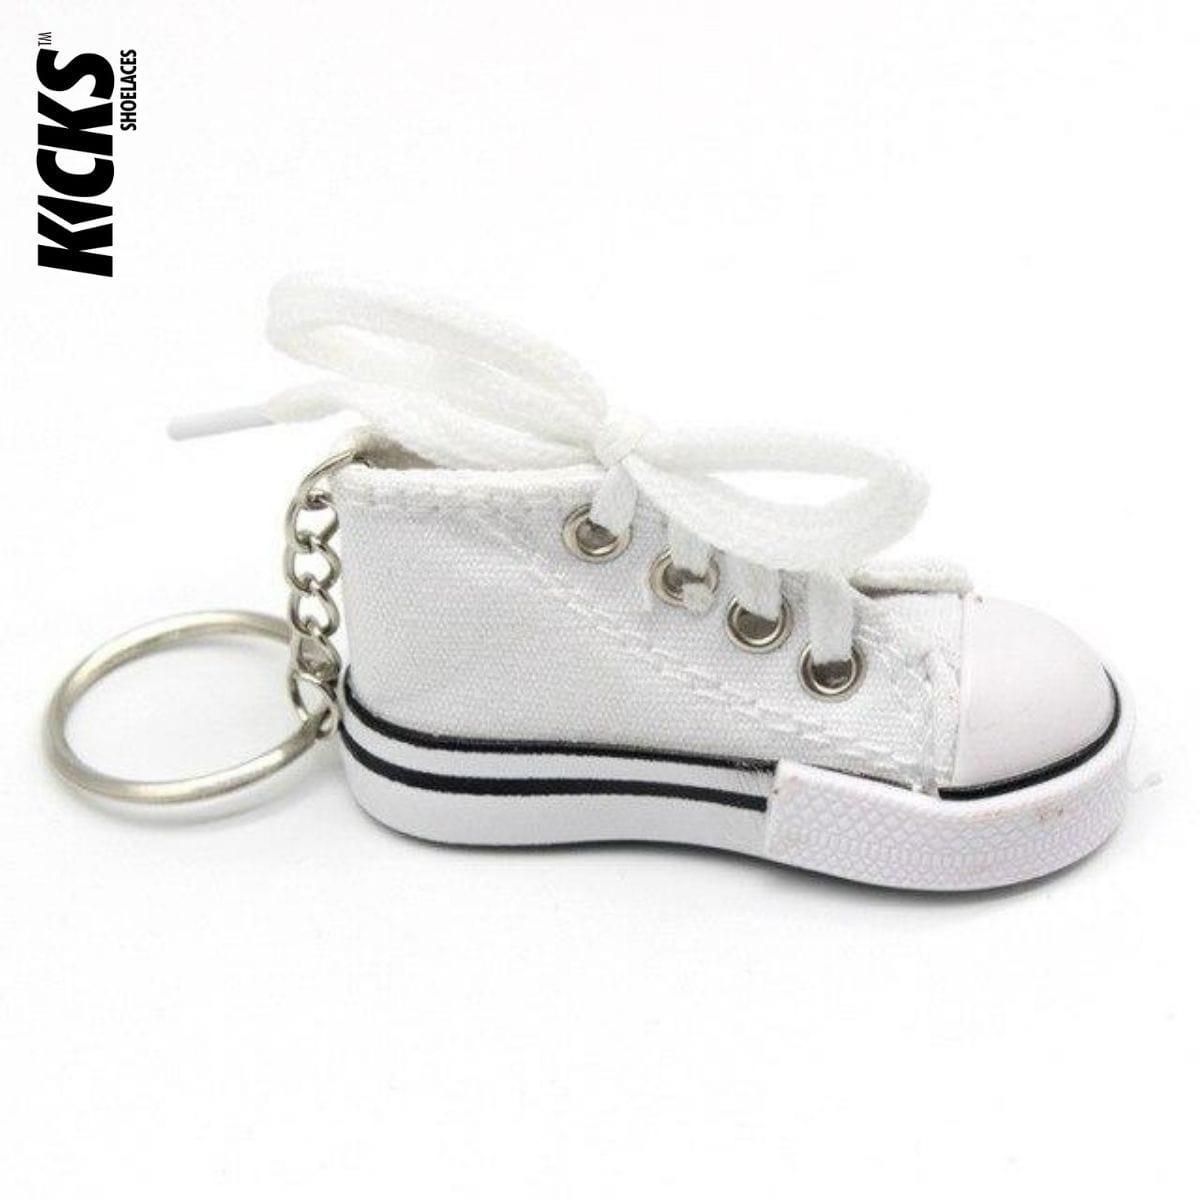 white-high-top-sneaker-keychain-perfect-gift-best-charm-accessories.jpg